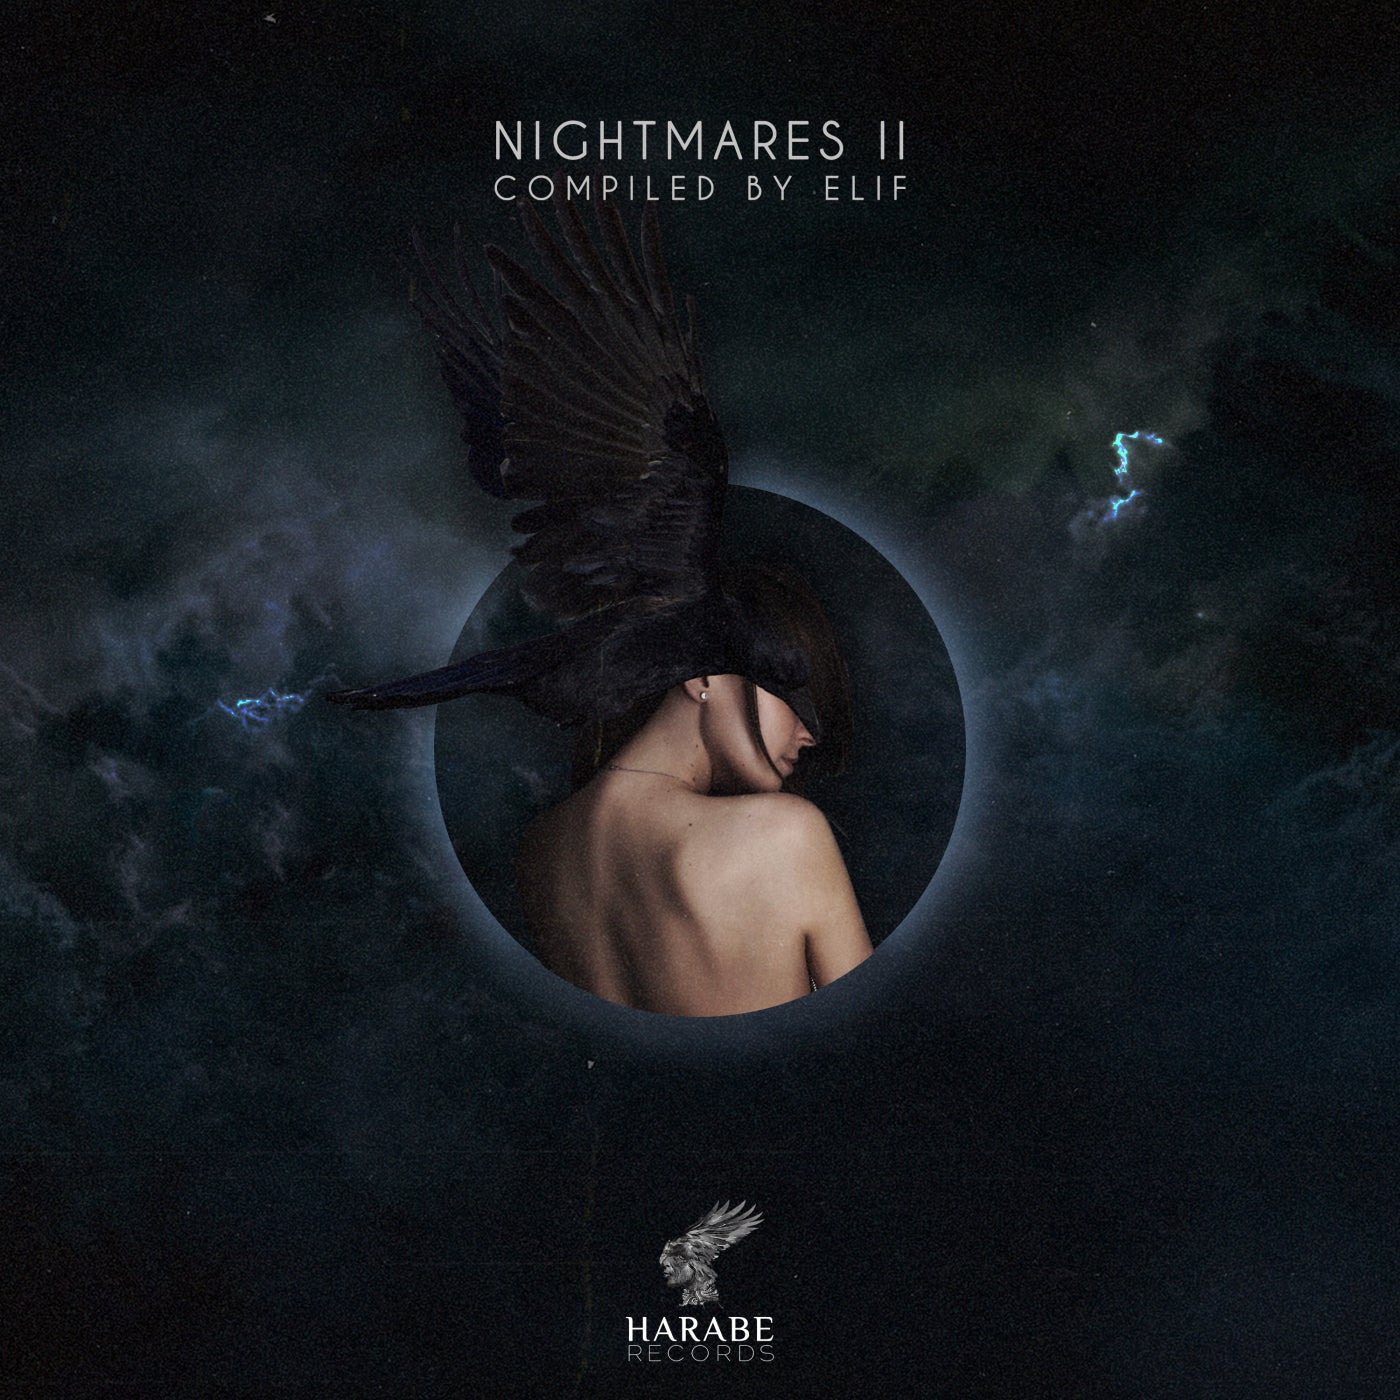 VA - Harabe Nightmares II [Compiled by Elif] [HRB039]